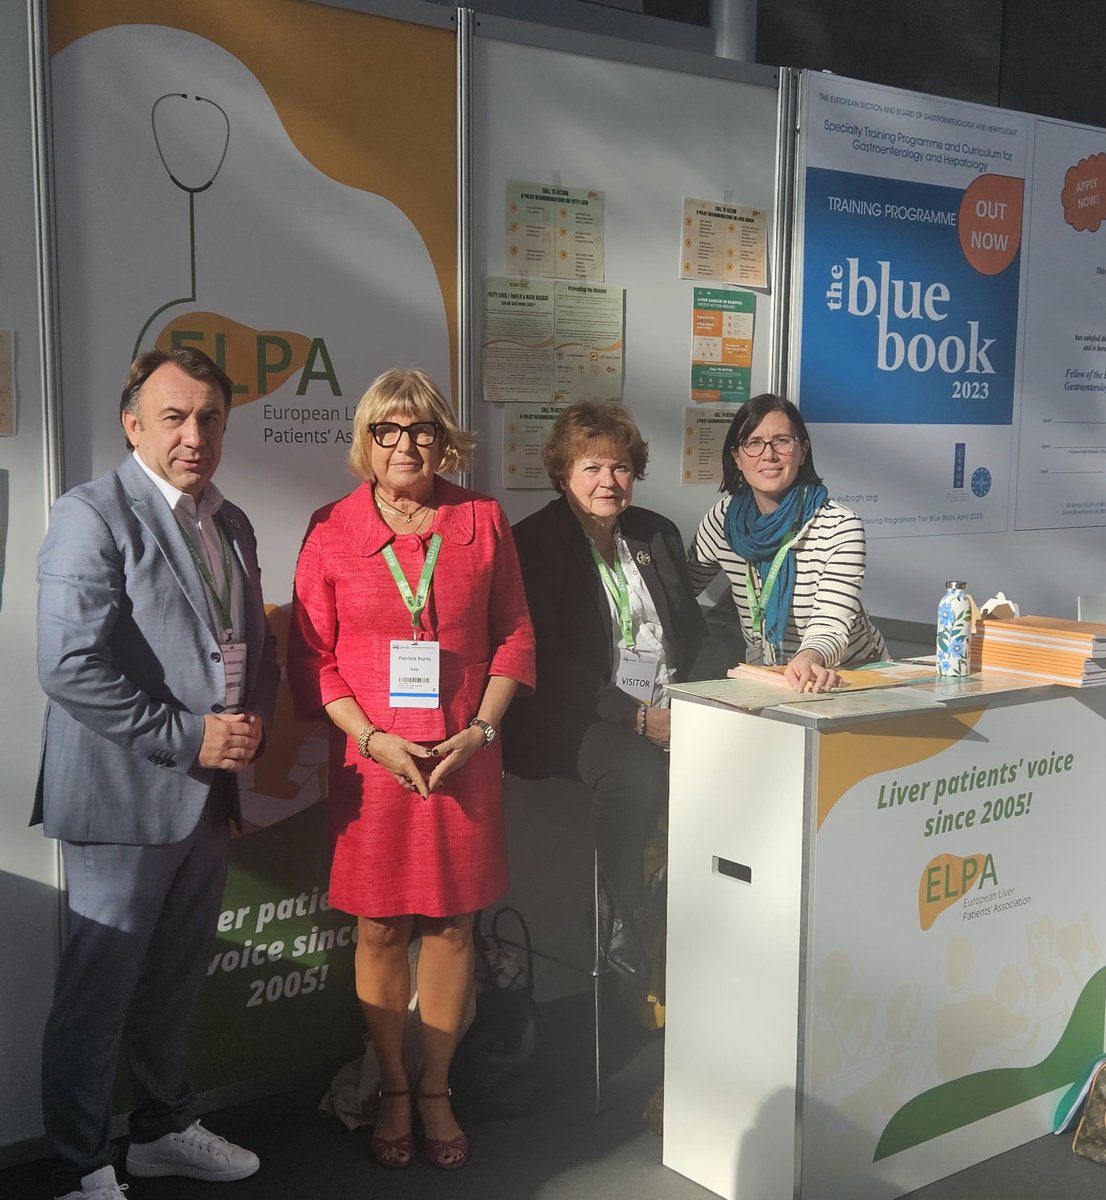 🌟 Honored to welcome Patrizia Burra, representing UEG Public Affairs, to the ELPA booth at #UEGWeek Sharing the vision of liver patients at the European level is our privilege. Grateful for the chance to connect, network, and make a difference together #LiverCancerAwarenessMonth